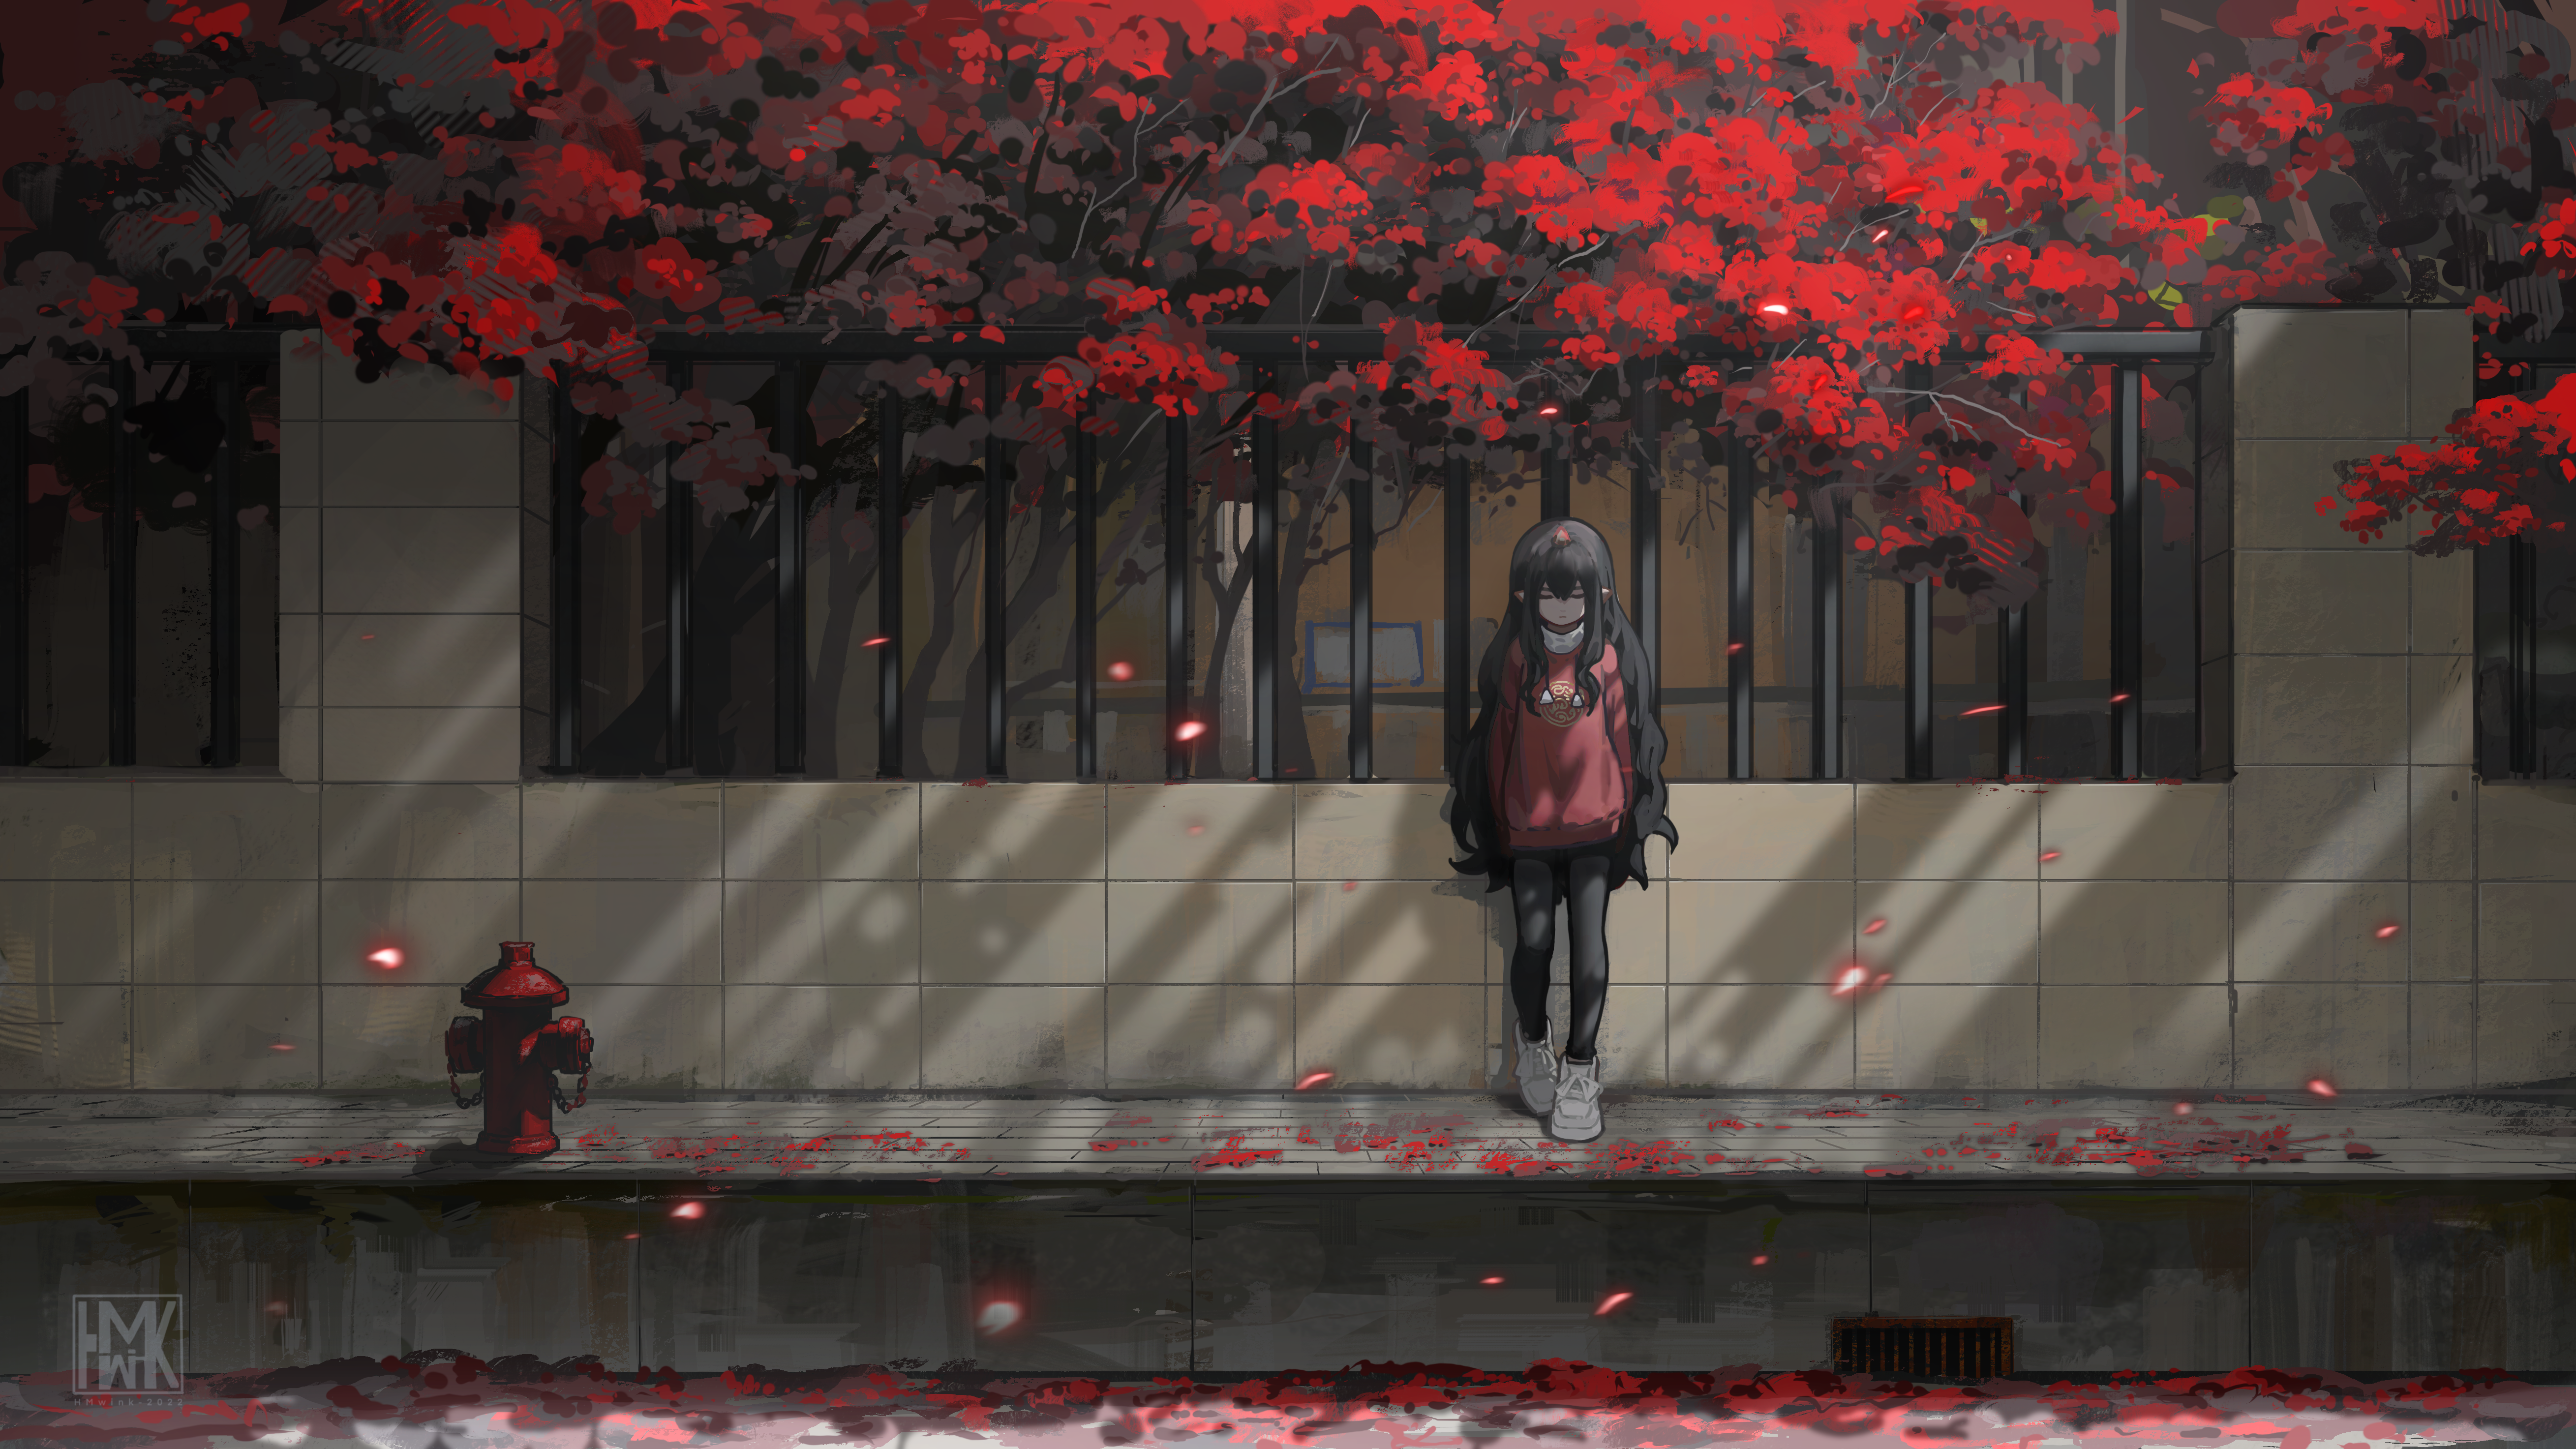 Anime 5237x2946 Hua Ming wink original characters illustration anime girls pointy ears trees bars Pixiv sitting fire hydrants petals